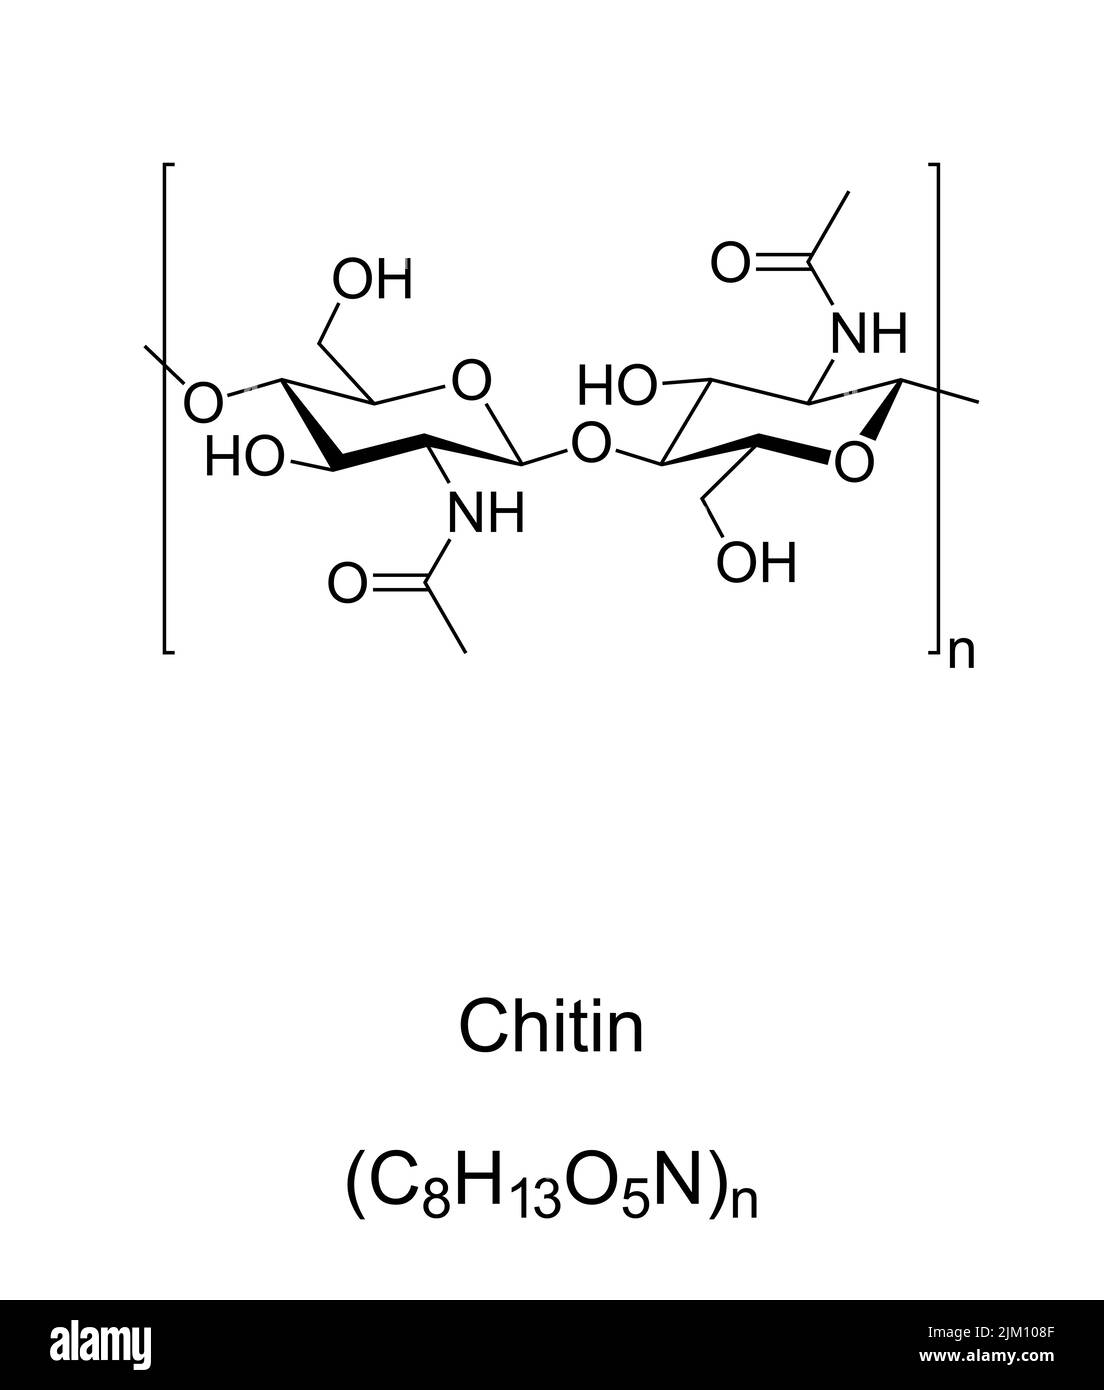 Chitin, chemical formula and structure. Long chain polymer of N-acetylglucosamine. Polysaccharide. Component of cell walls in insect exoskeletons. Stock Photo